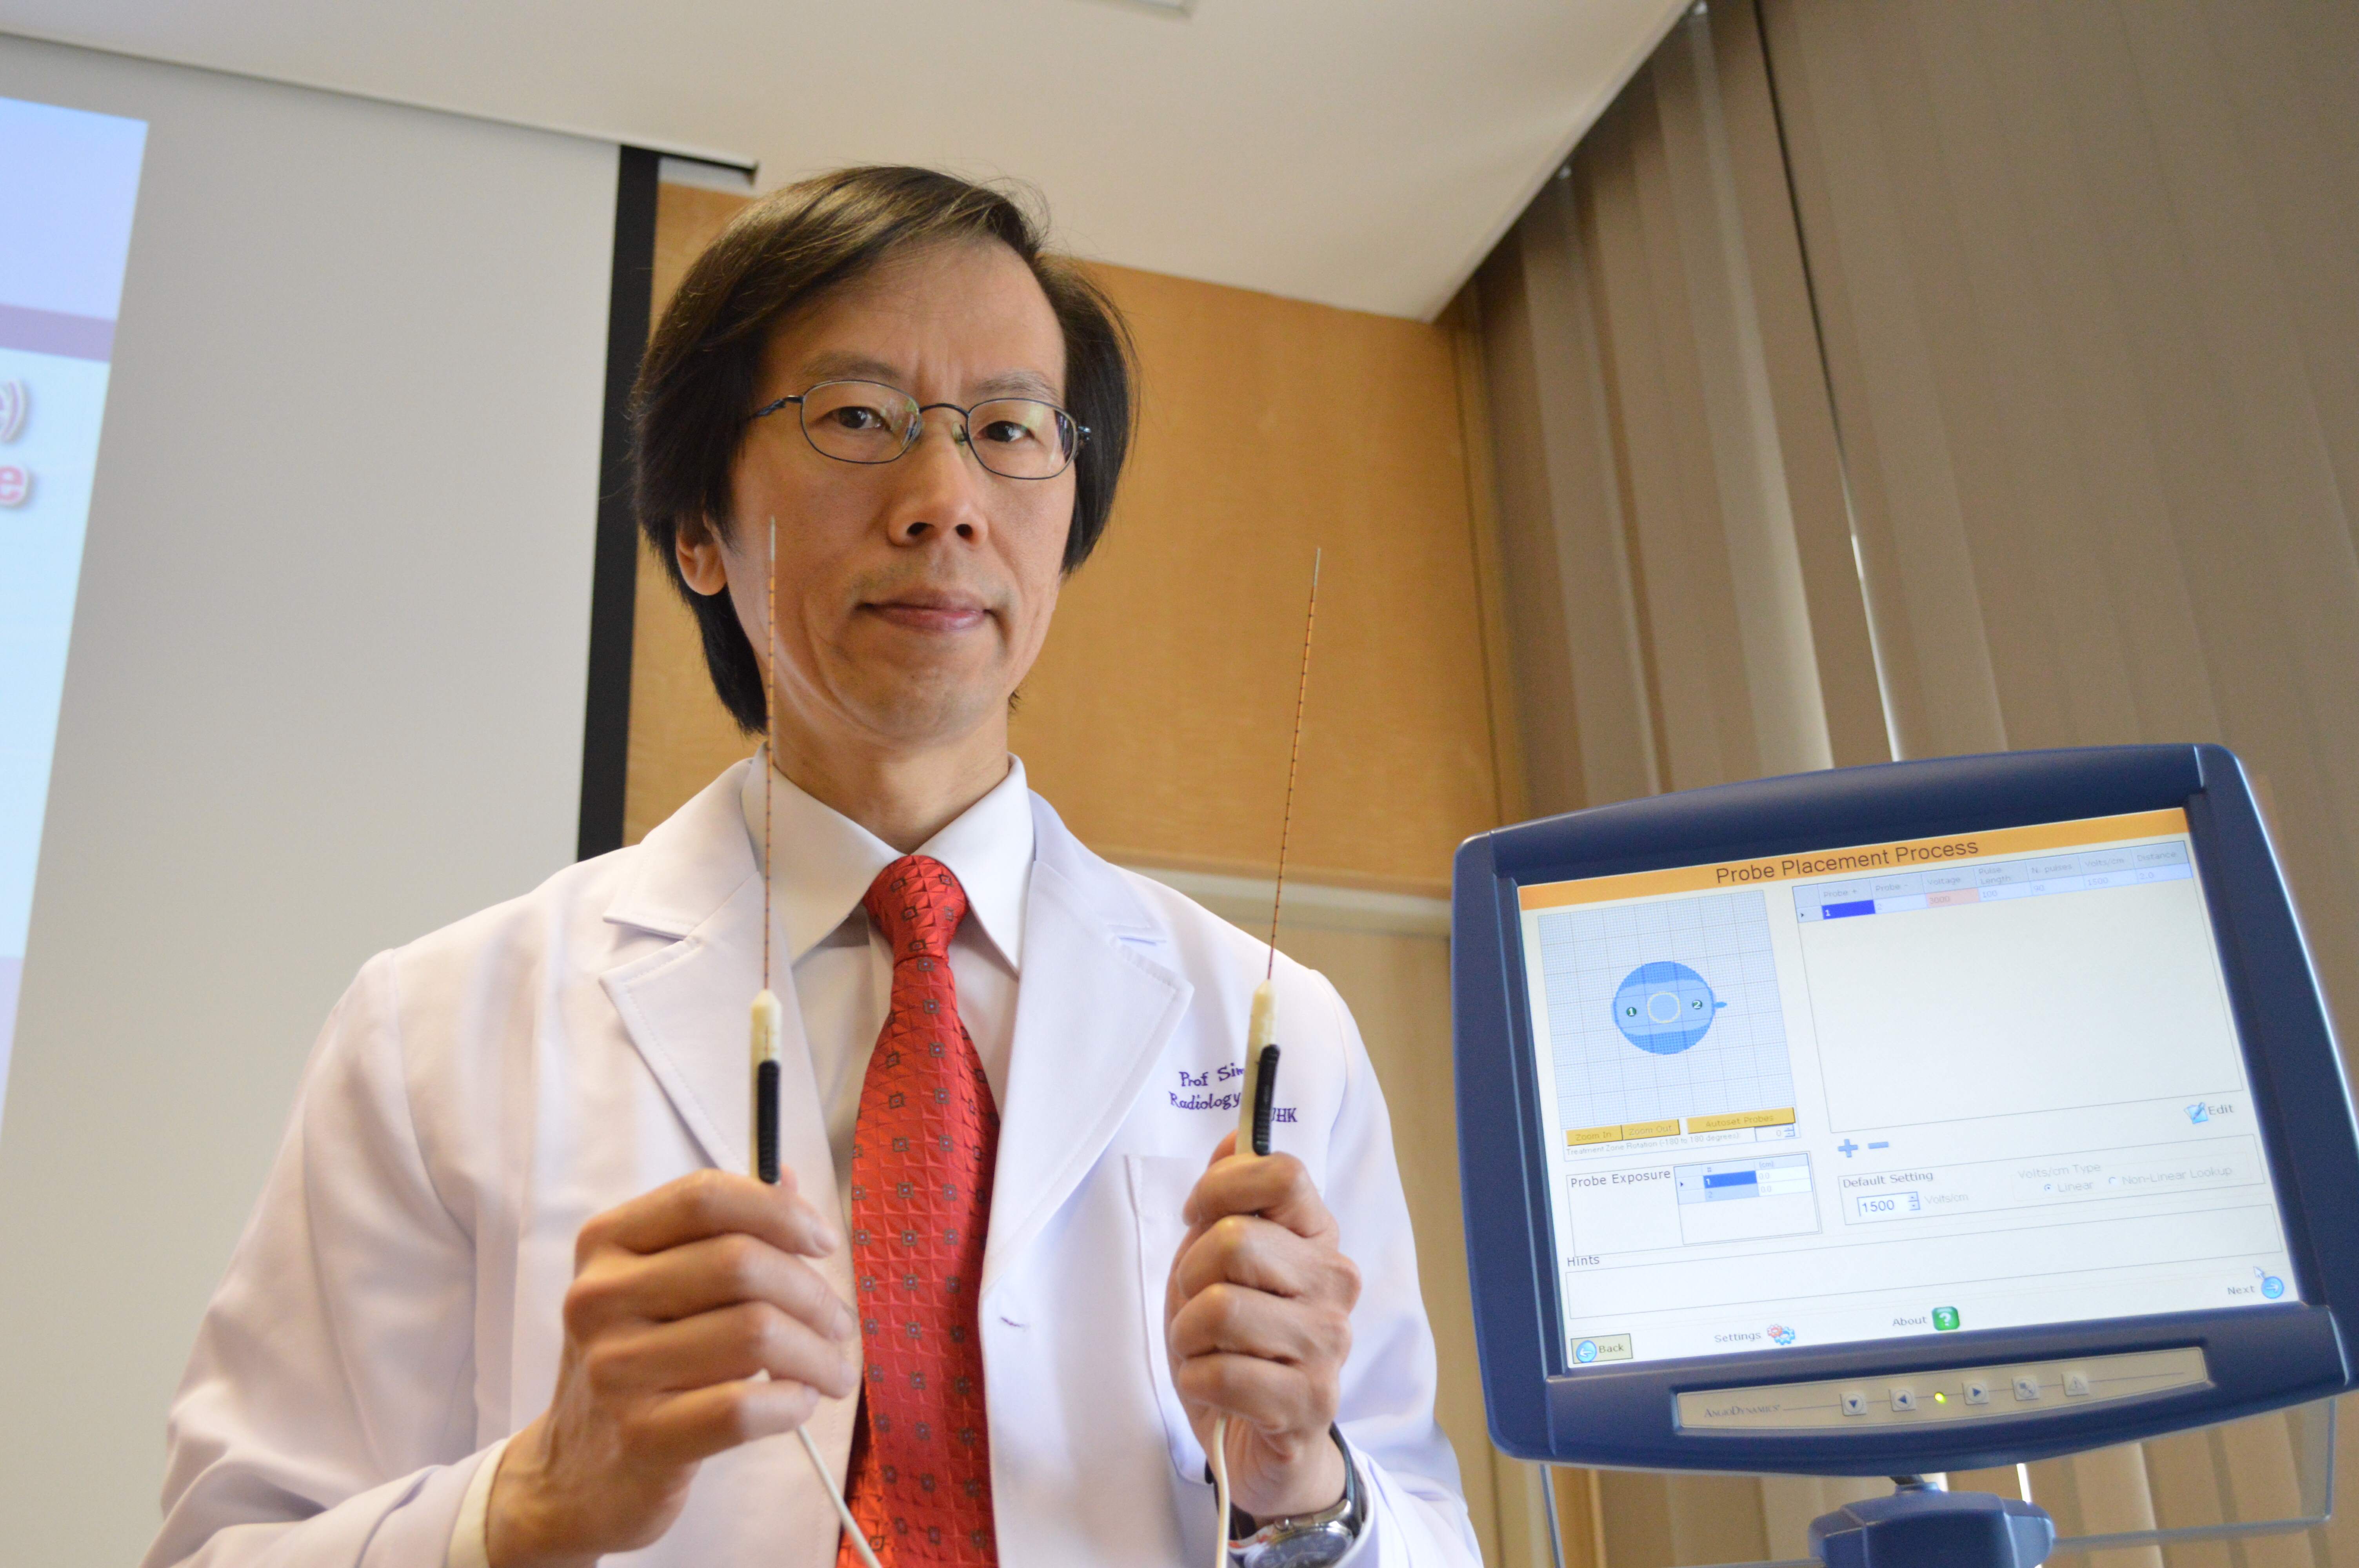 Prof. Simon Yu, Director of Vascular and Interventional Radiology Foundation Clinical Science Center and Professor of Department of Imaging and Interventional Radiology, CUHK successfully conducted the animal study and clinical case of percutaneous Nanoknife.